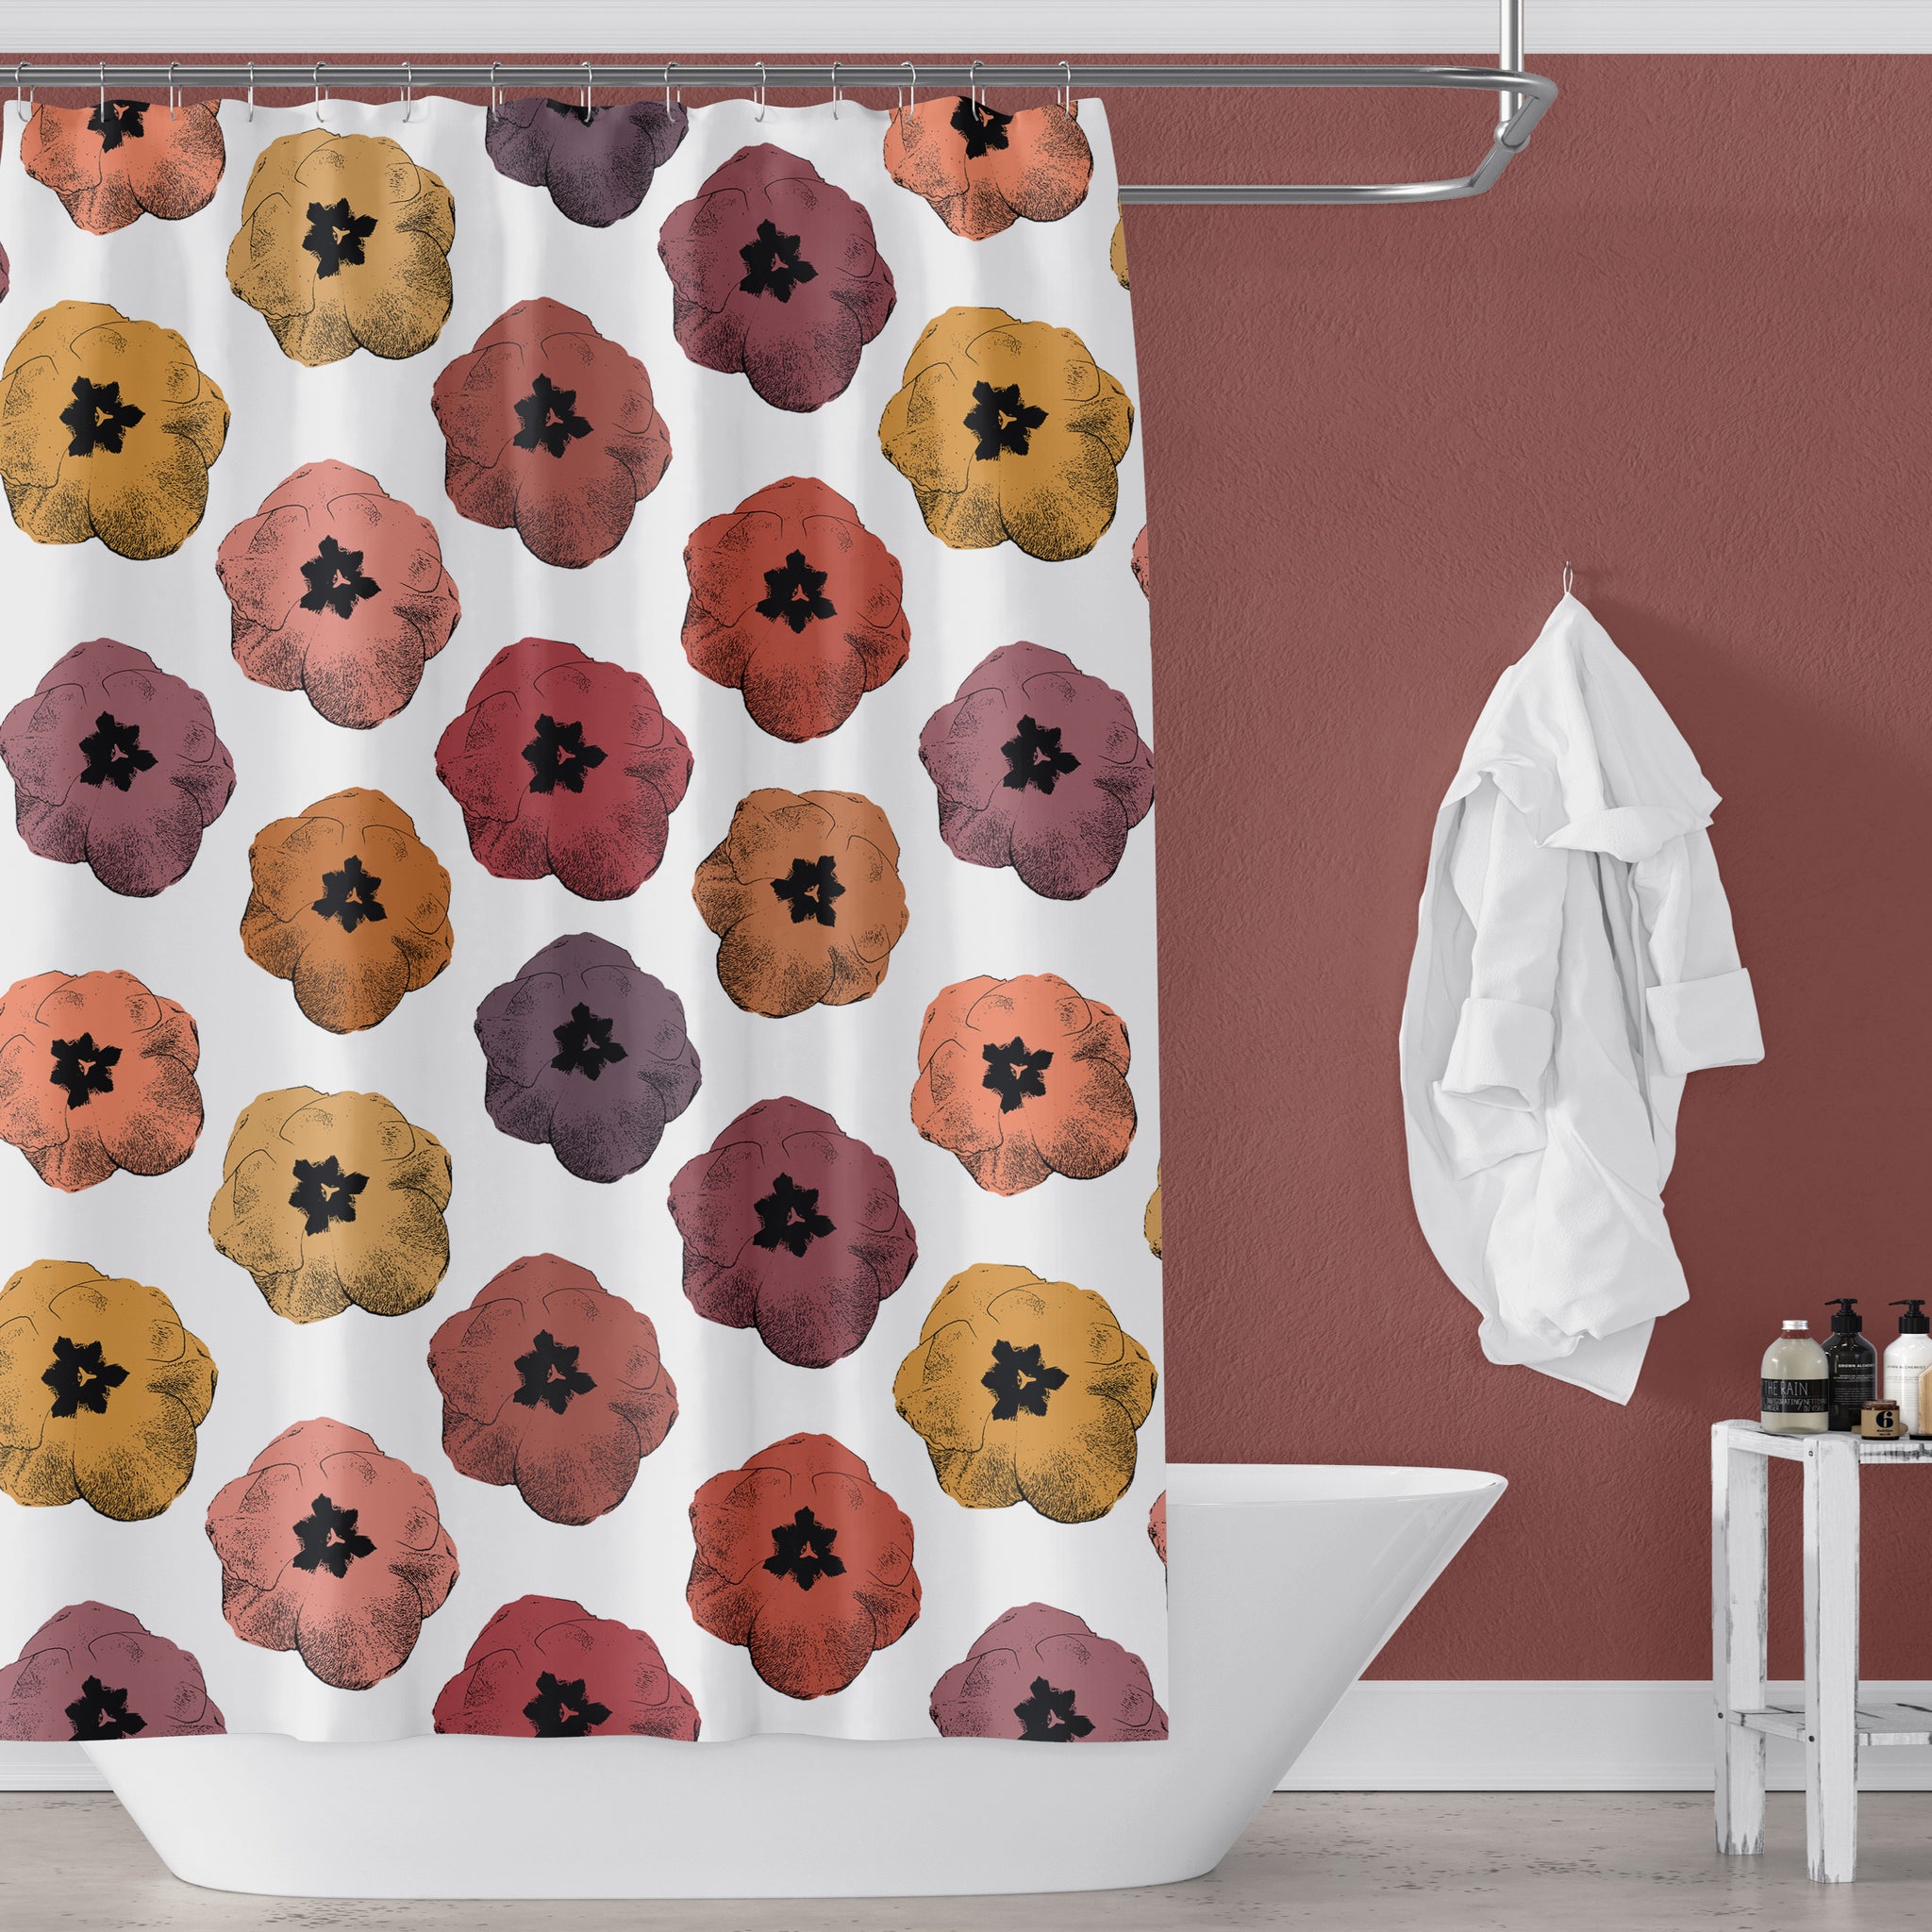 Retro Pop Art Tulip Print Shower Curtain in Reds, Oranges, Pinks, Yellows and Purples - Metro Shower Curtains